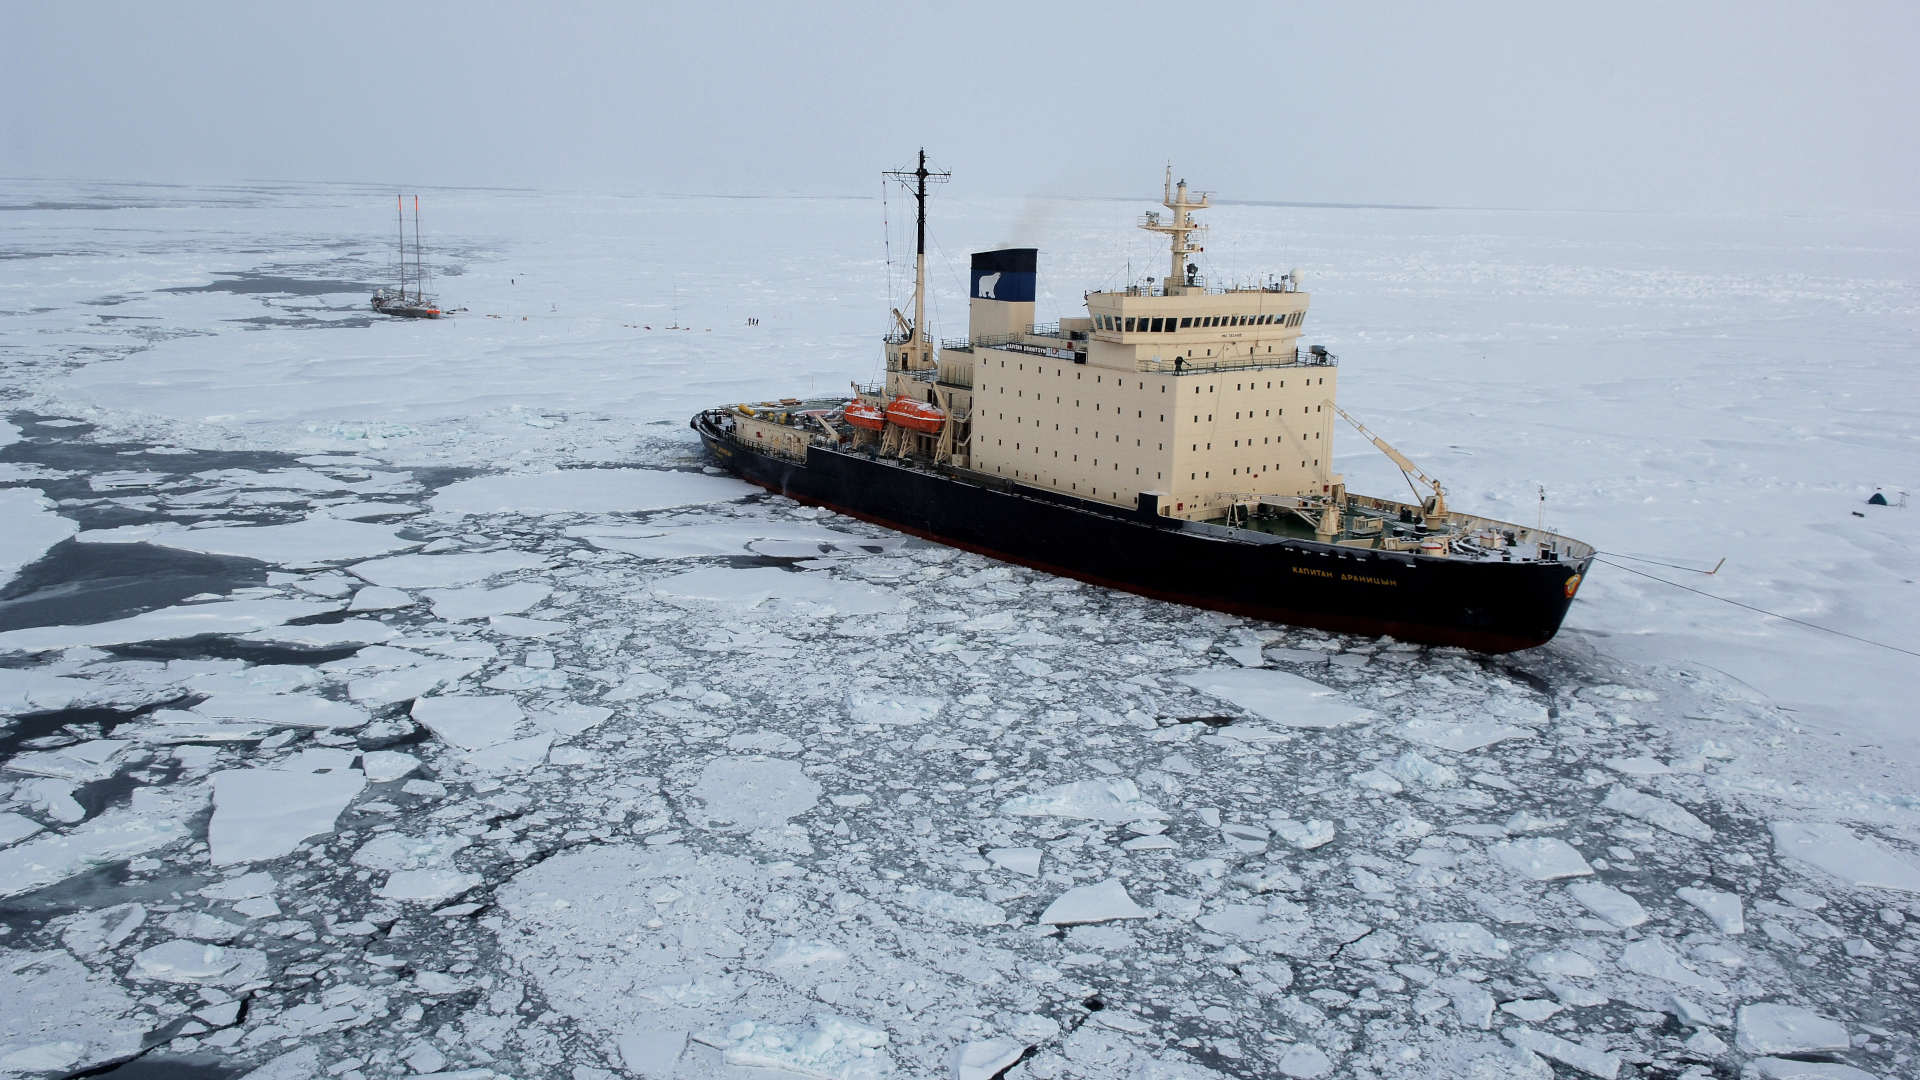 The Russian icebreaker Kapitan Dranitsyn moored in north of western Russia to study Arctic climatology in 2006.